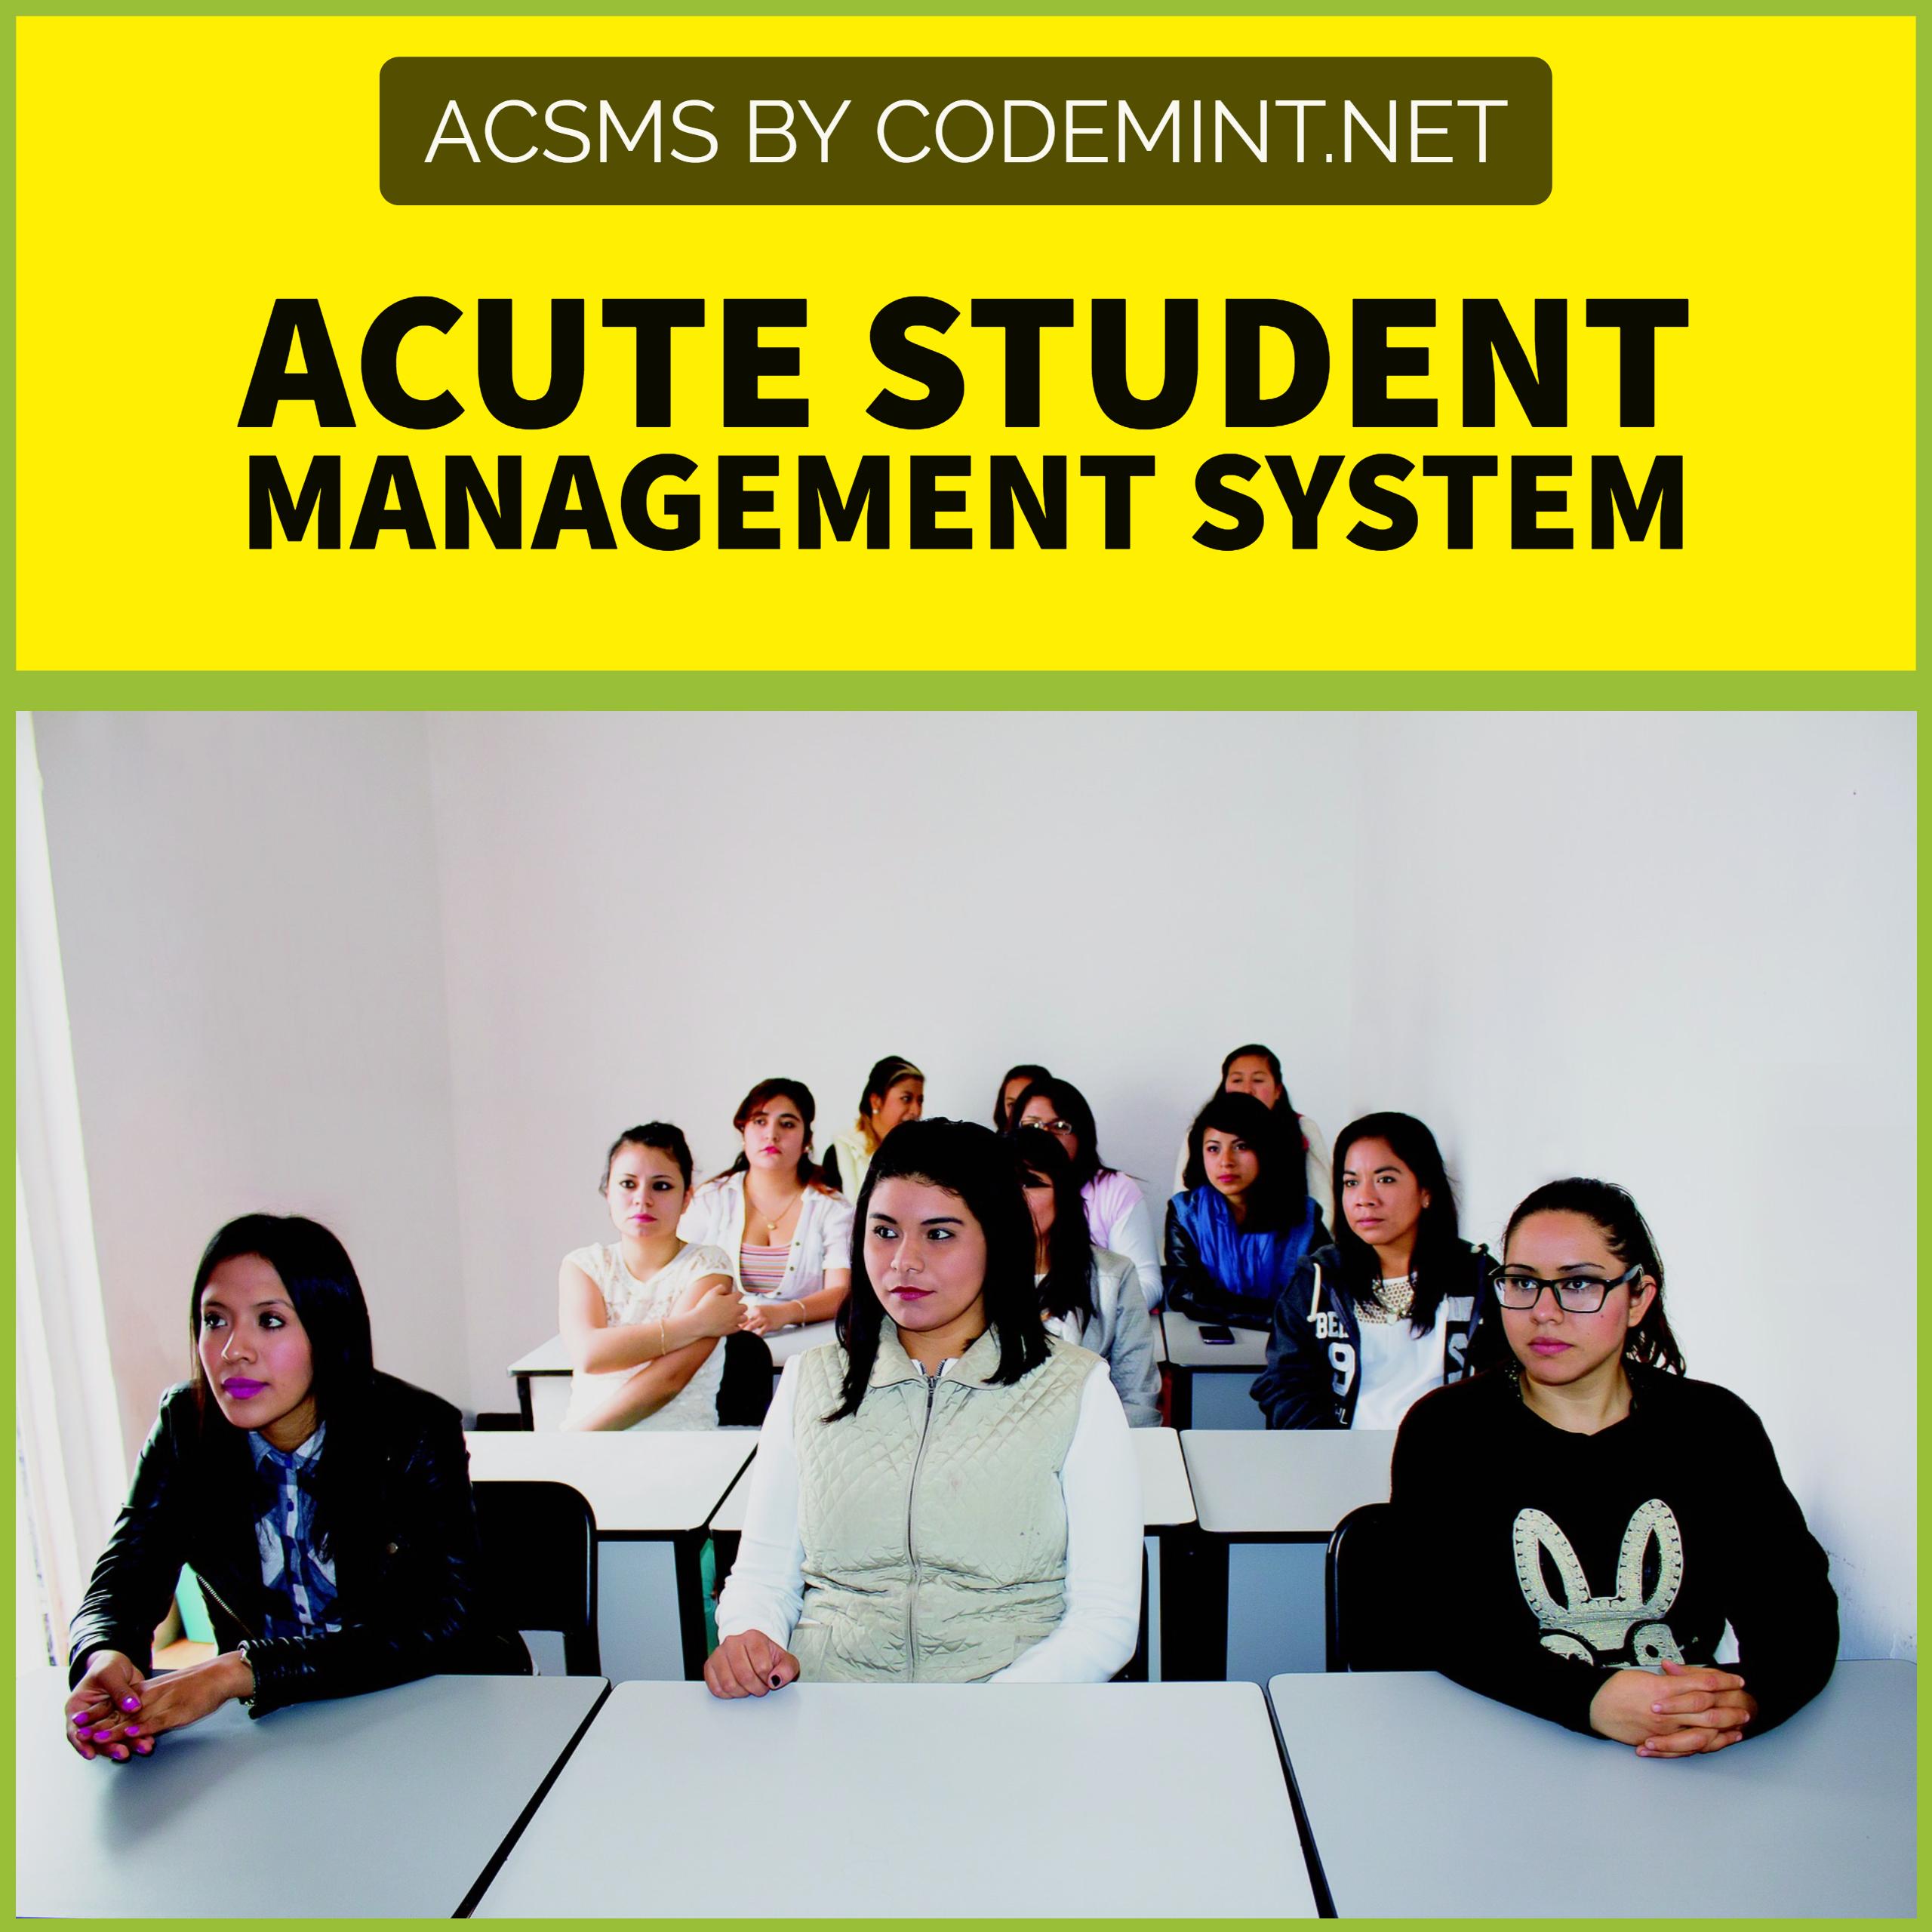 AcSMS - Acute Student Management System (Design and Implementation)